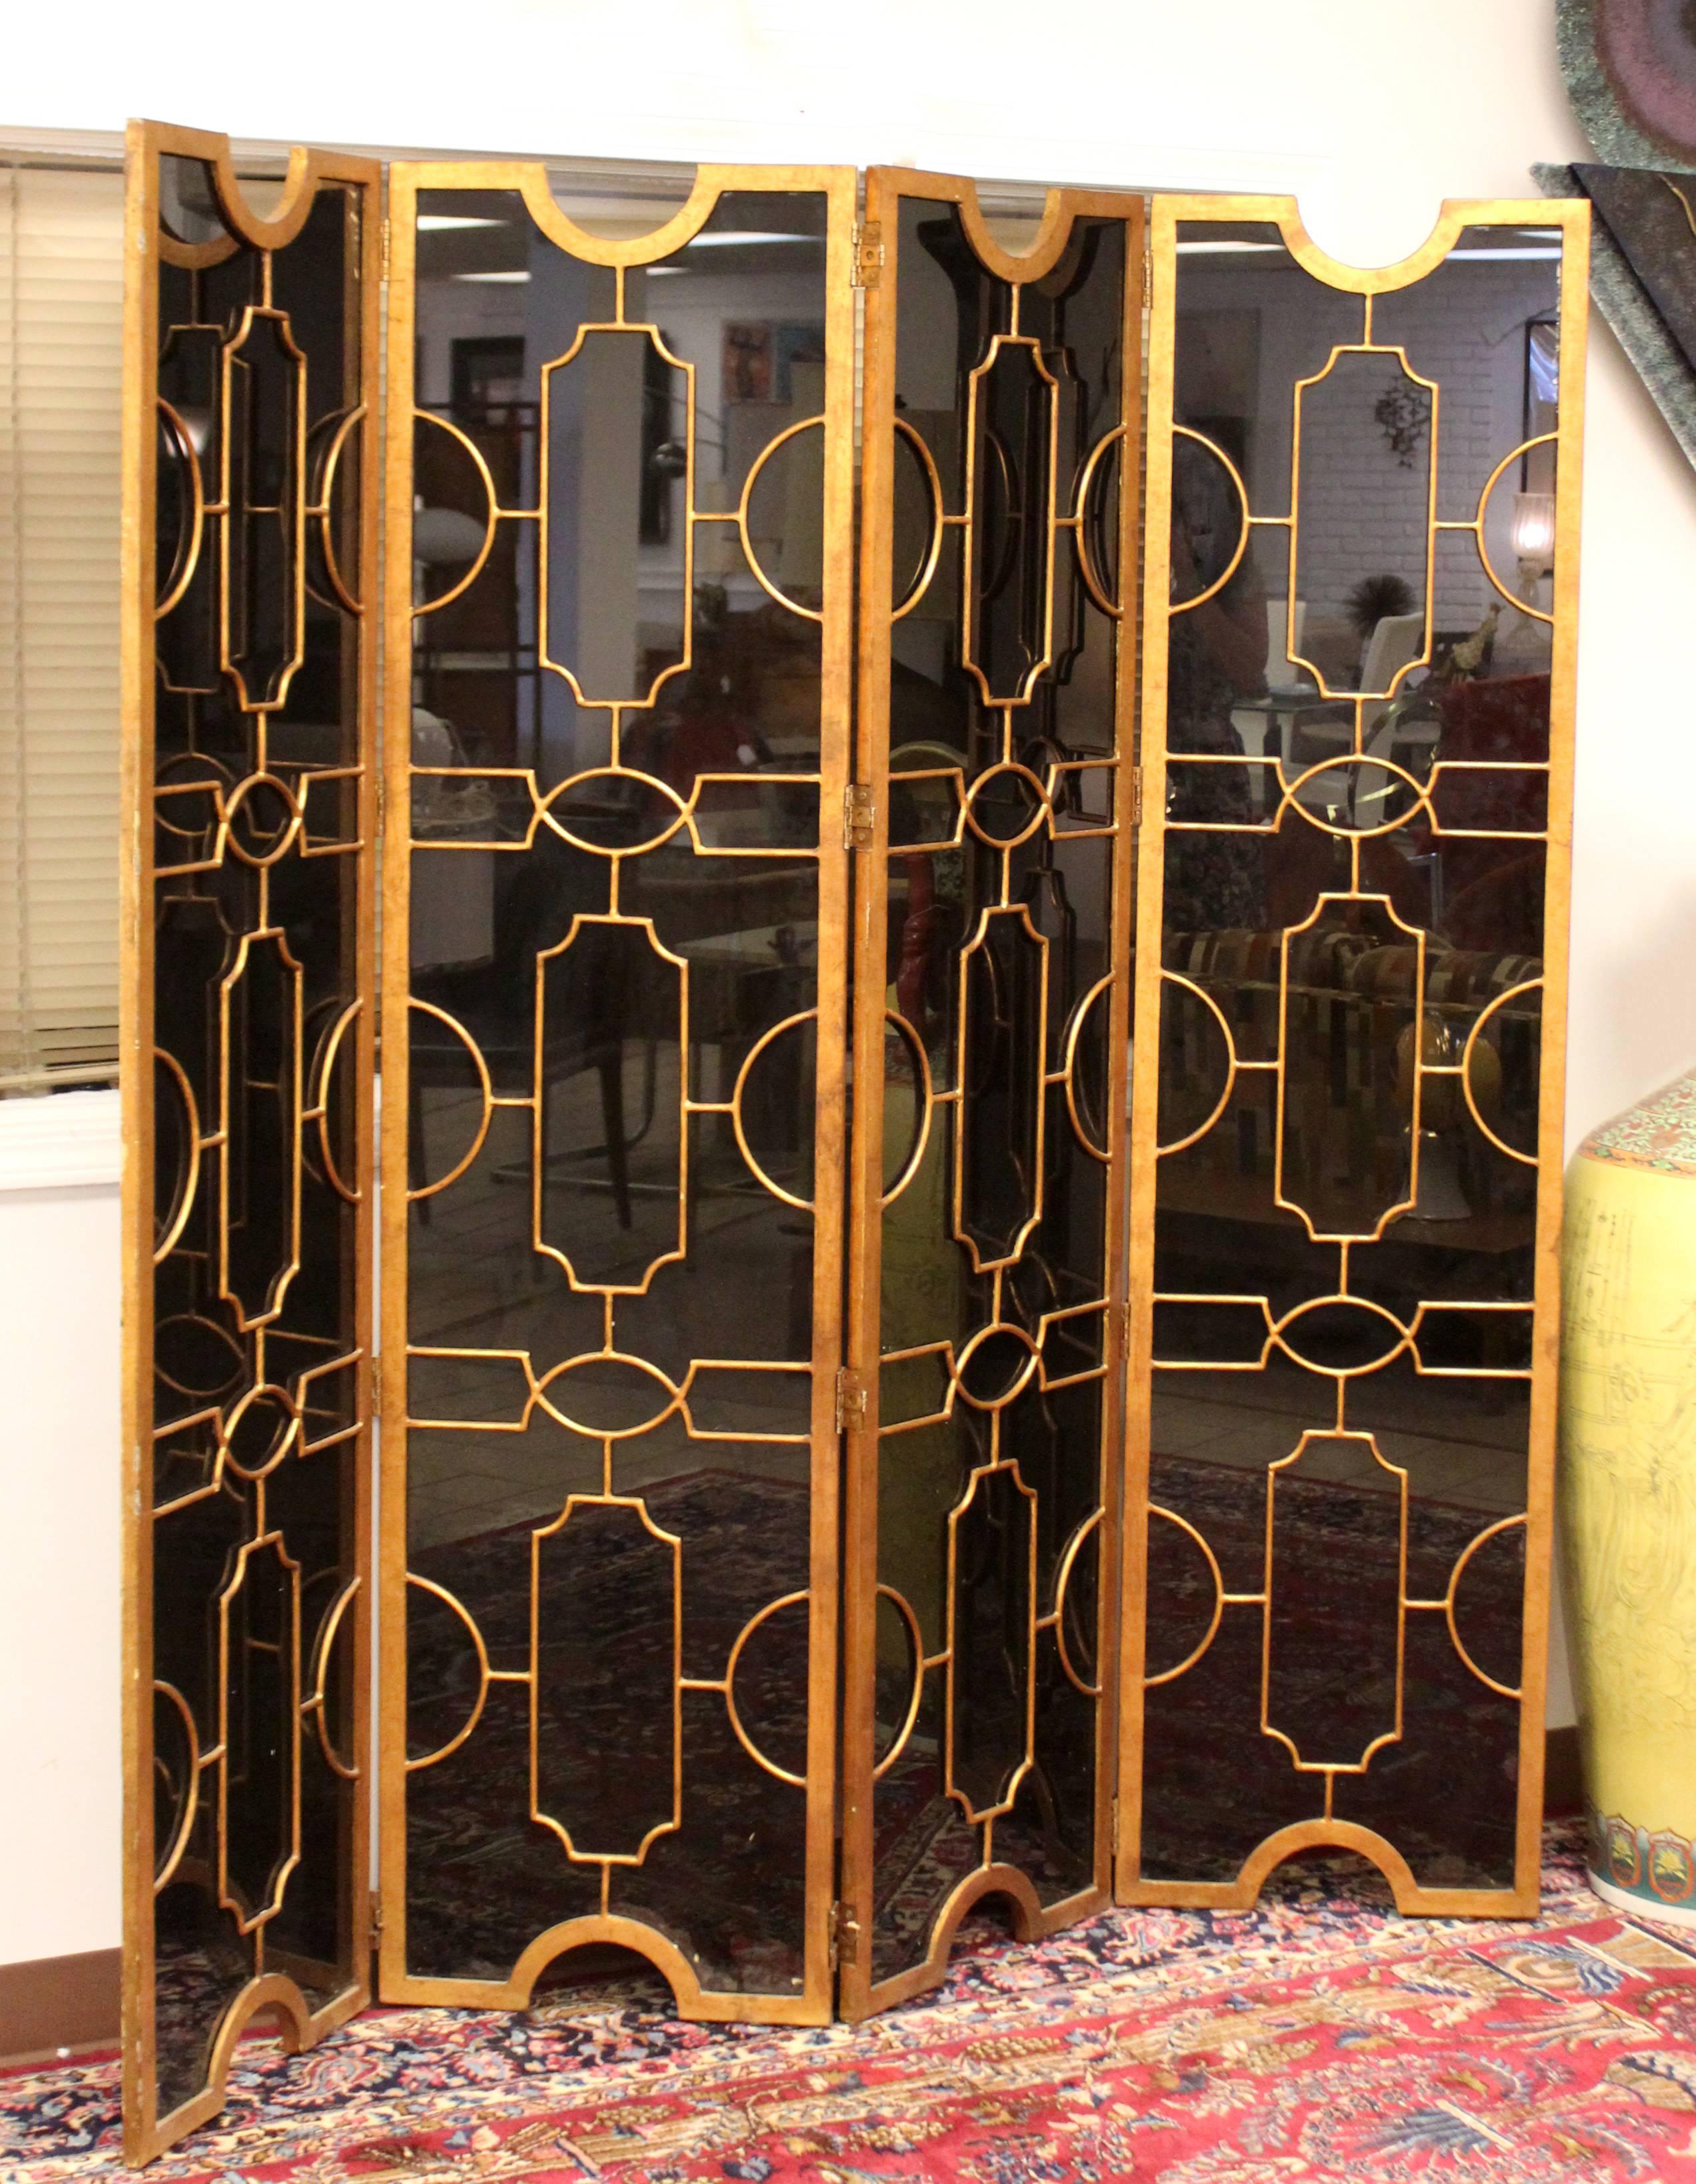 For your consideration is an absolutely stunning, black glass and bronze, intricately designed, folding panel room divider, from the Art Deco period. In excellent condition. The dimensions are 18